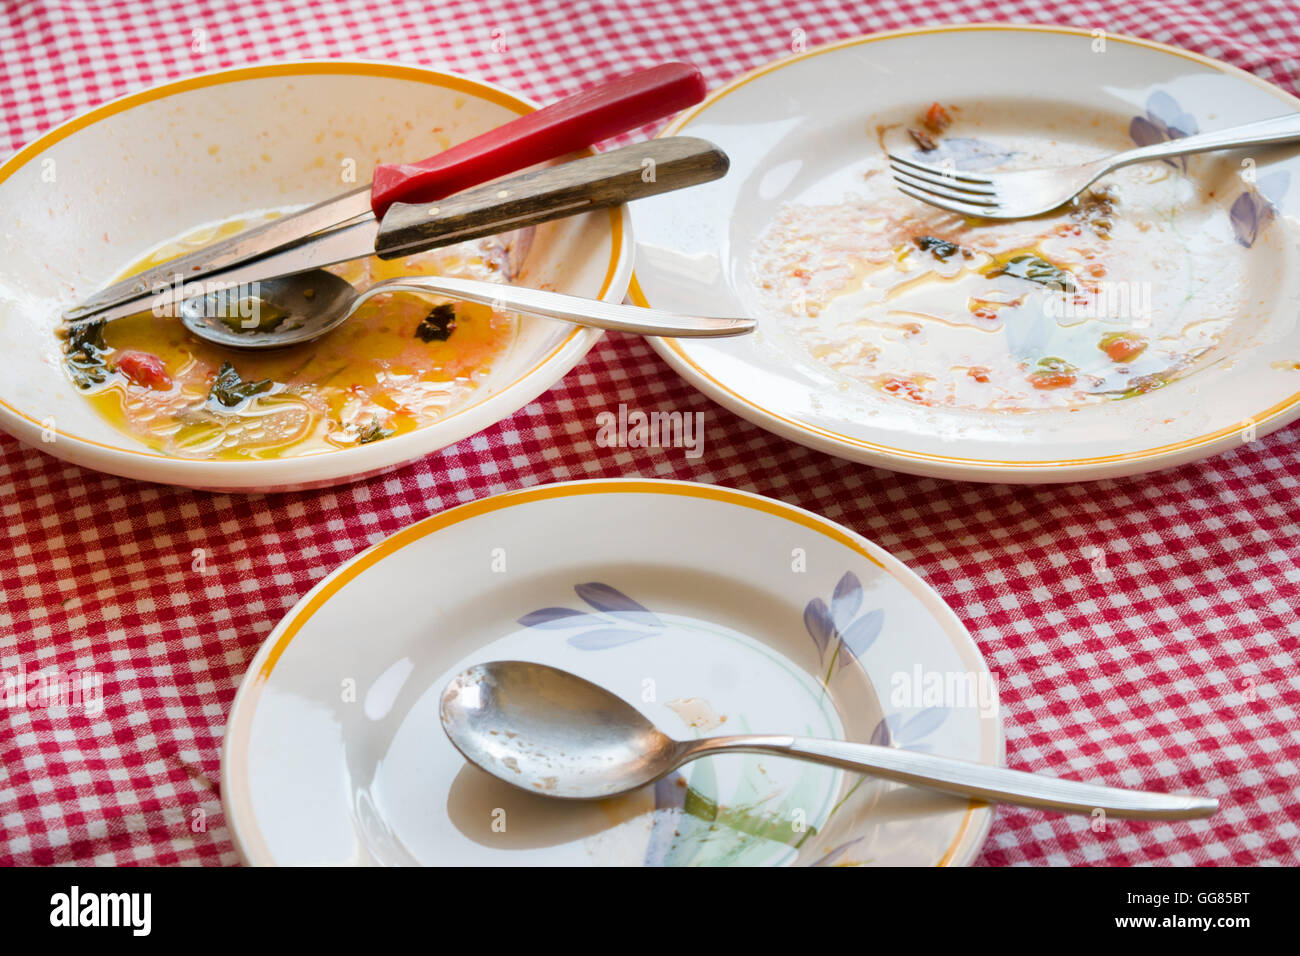 end the meal .some dirty dishes with sauce smeared on some plates Stock Photo